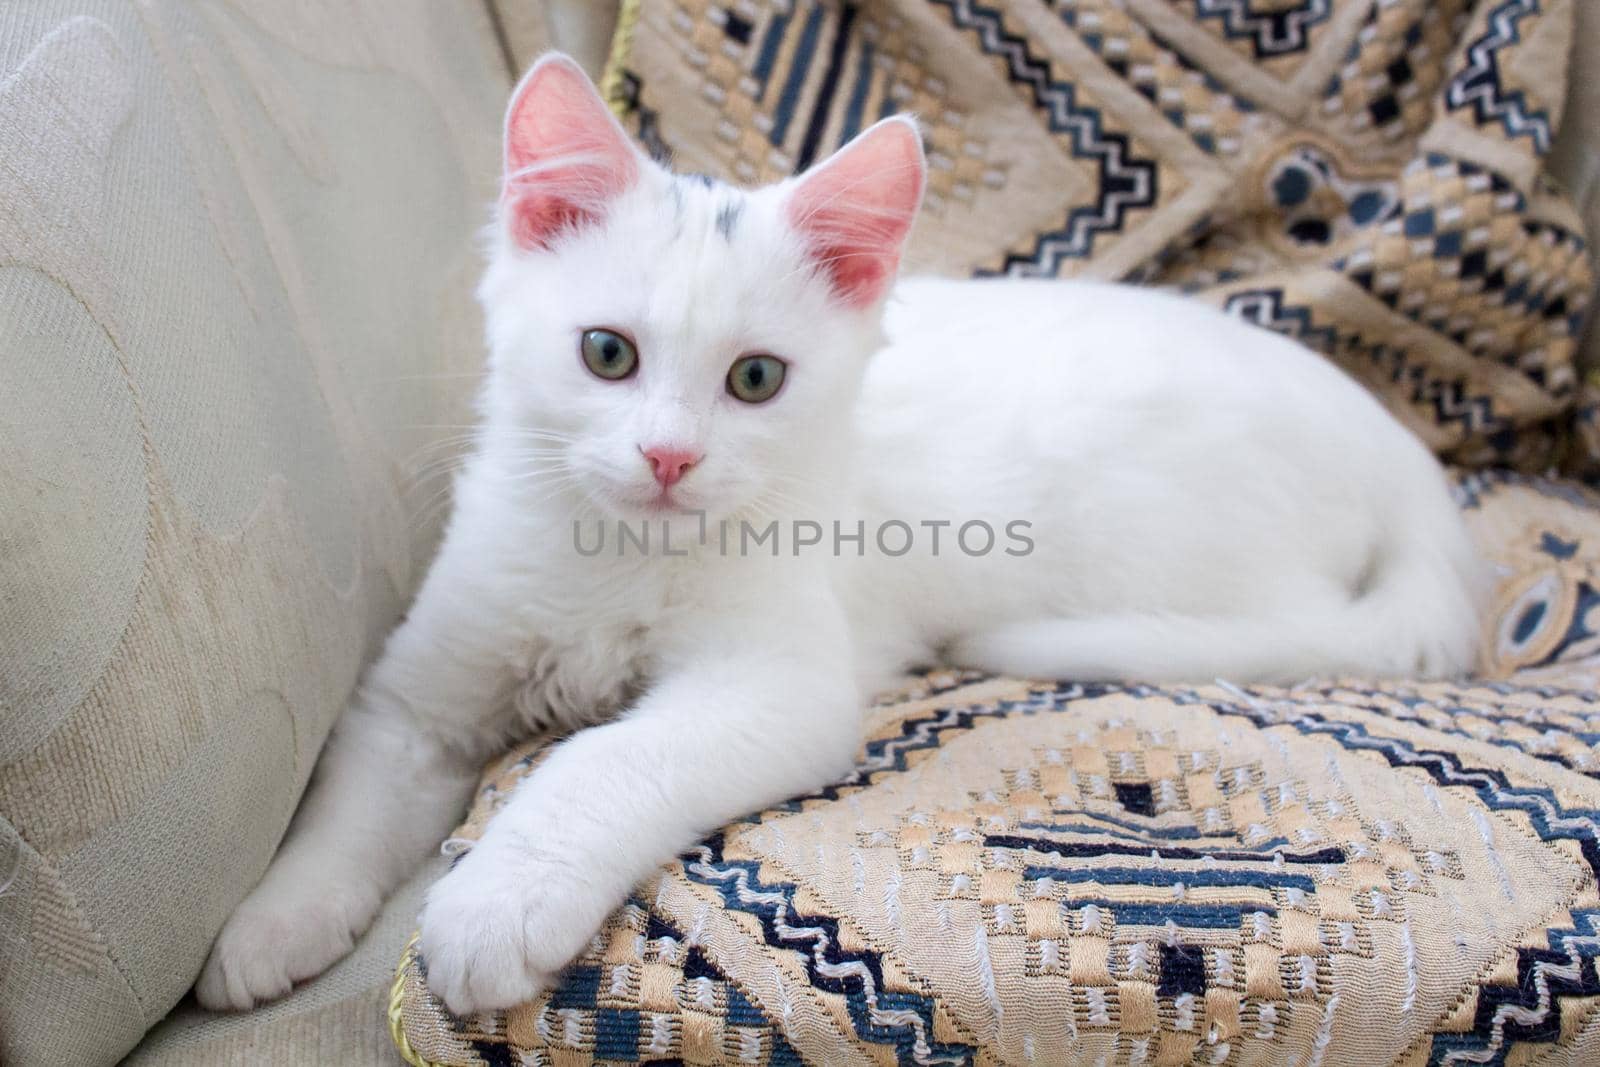 White baby cat with rose ears playing on pillow